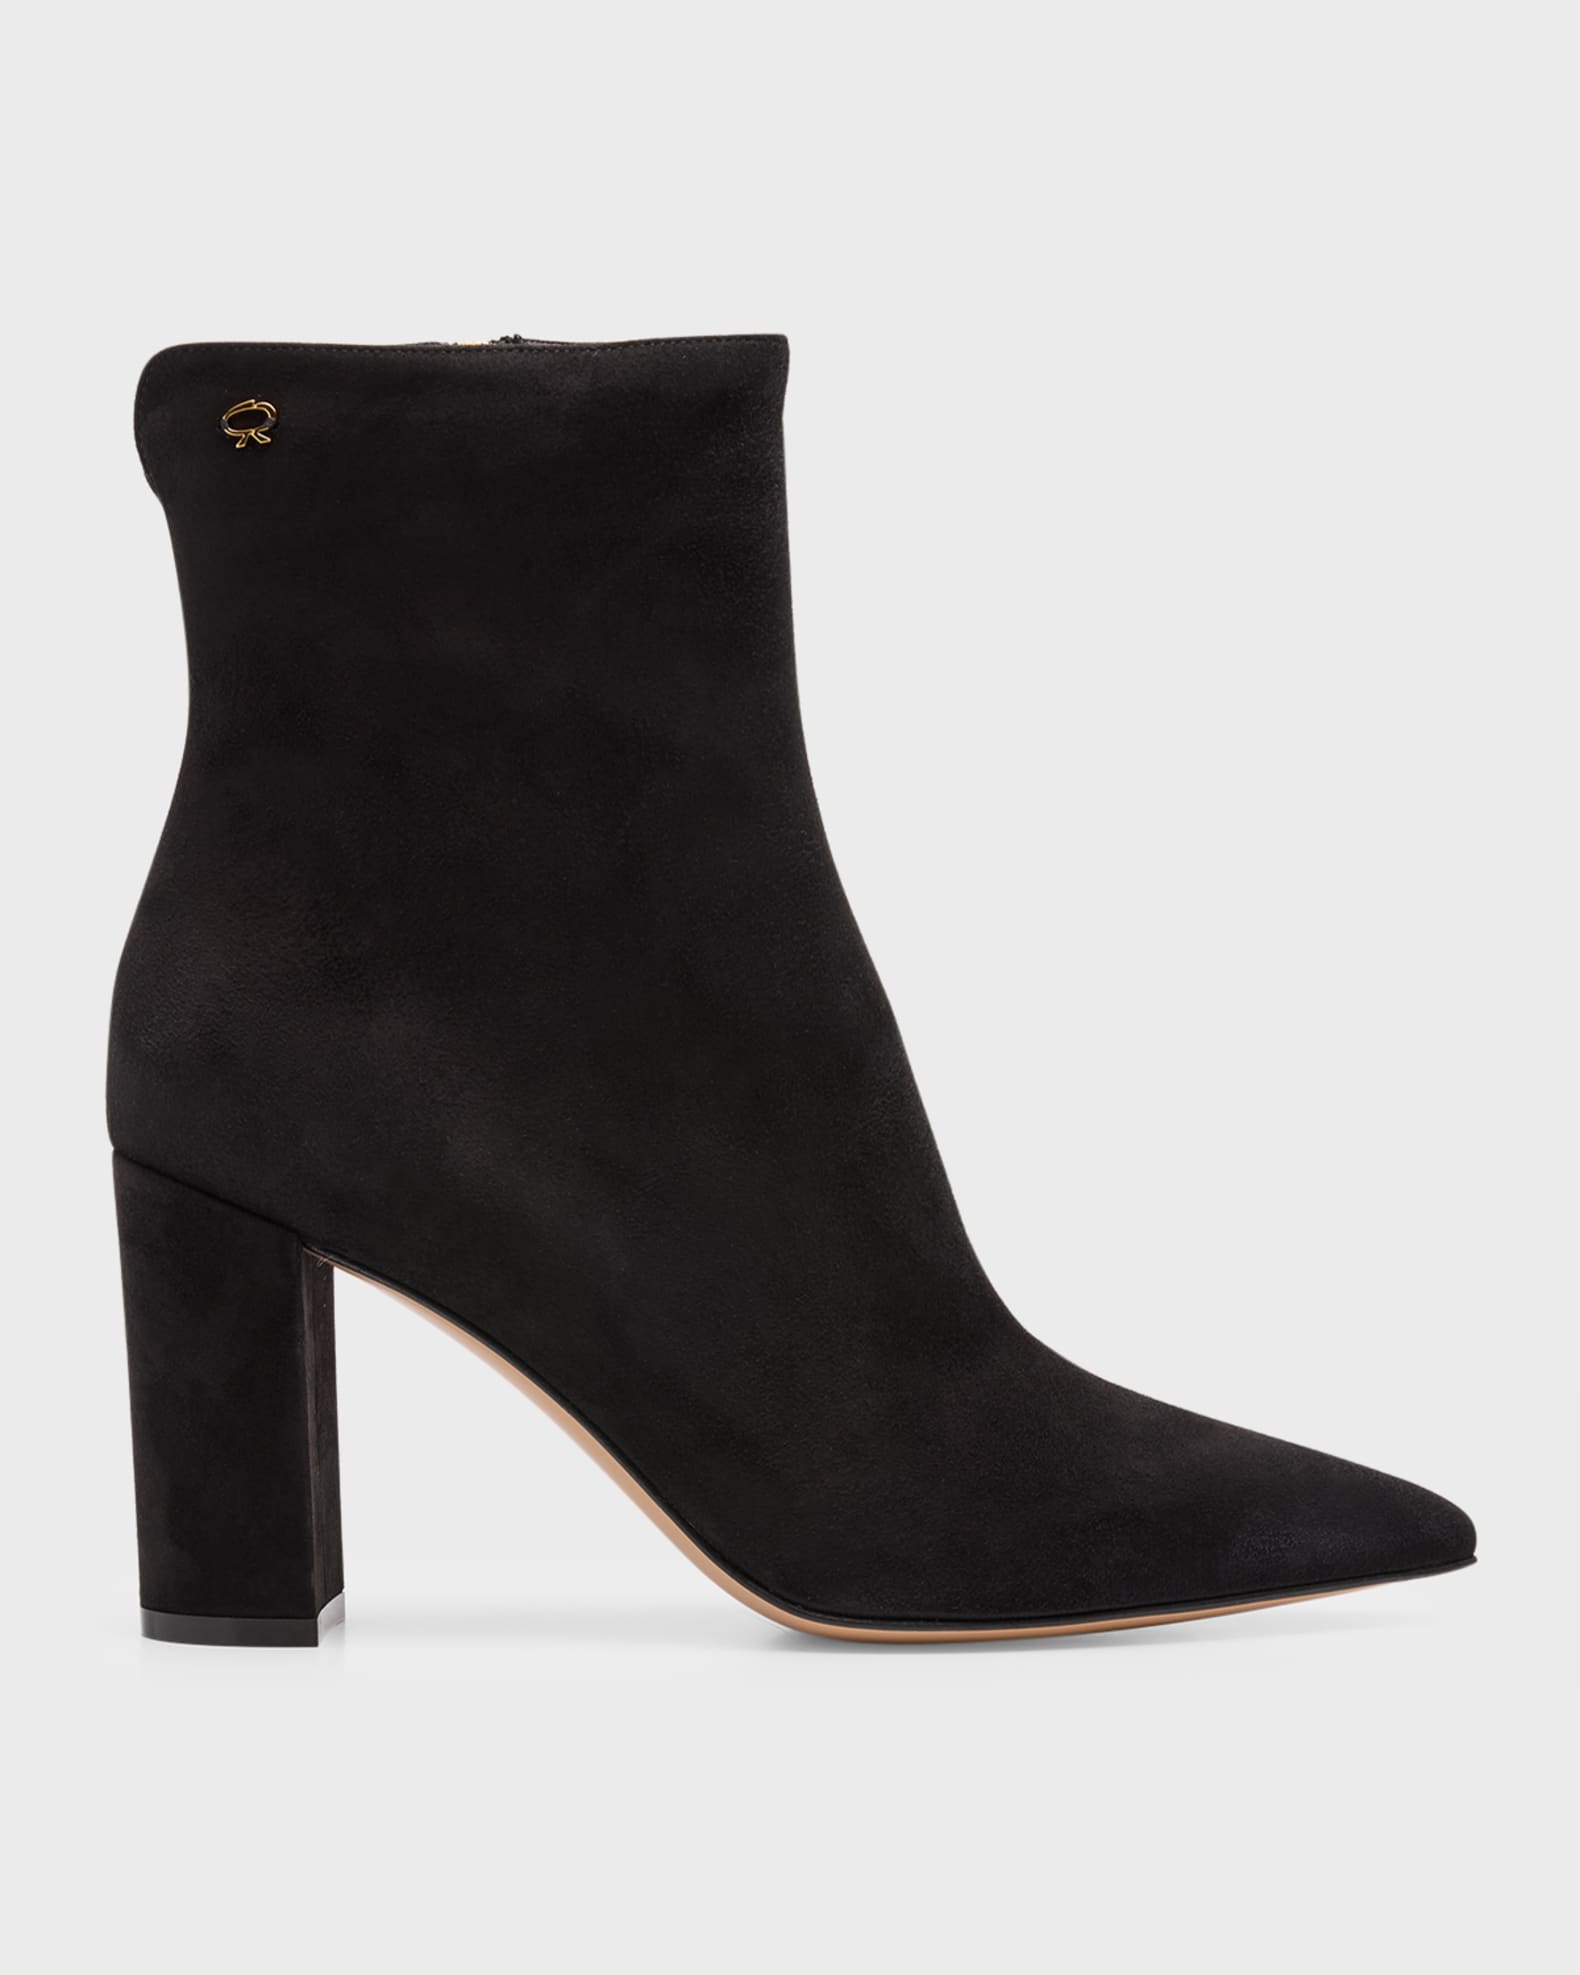 Gianvito Rossi Lyell Suede Ankle Booties | Neiman Marcus